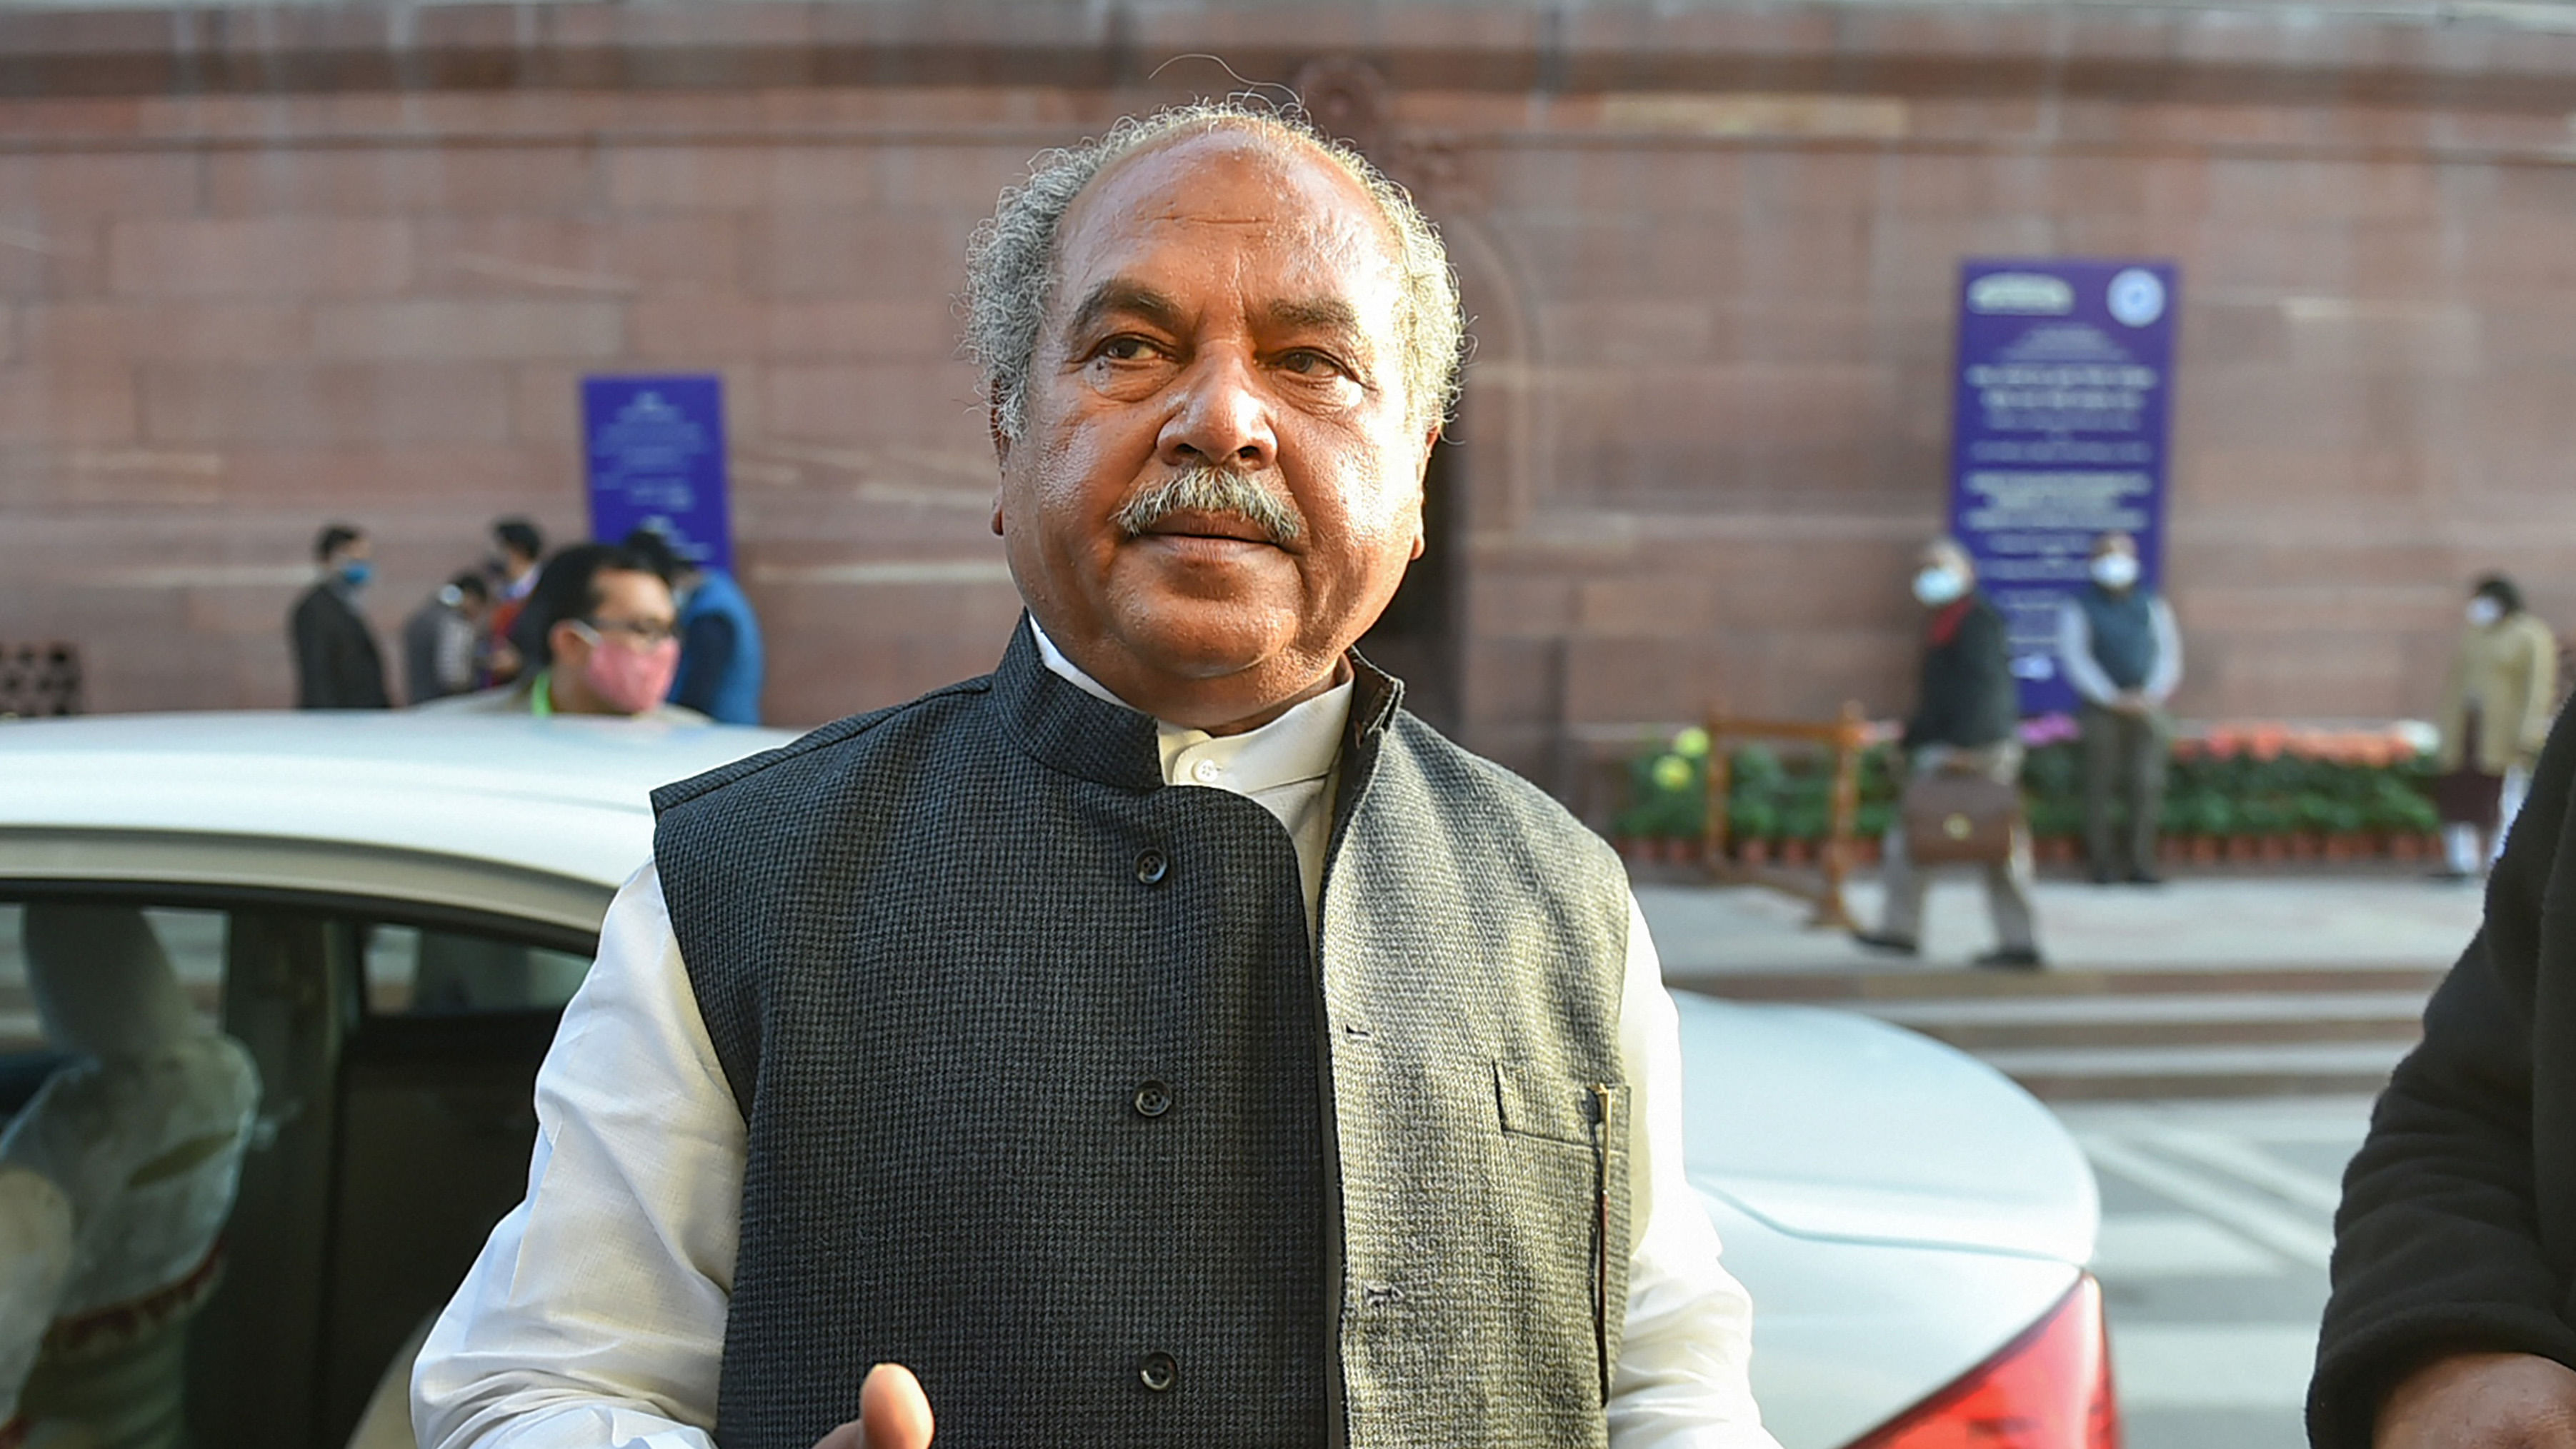 Agriculture Minister Narendra Singh Tomar, who rued "nobody is ready to tell what is wrong in these" (koi batane ko taiyar nahin isme kaala kya hai) when the agri laws were being called black laws, went hammer and tongs against the Opposition in the Upper House. Credit: PTI Photo